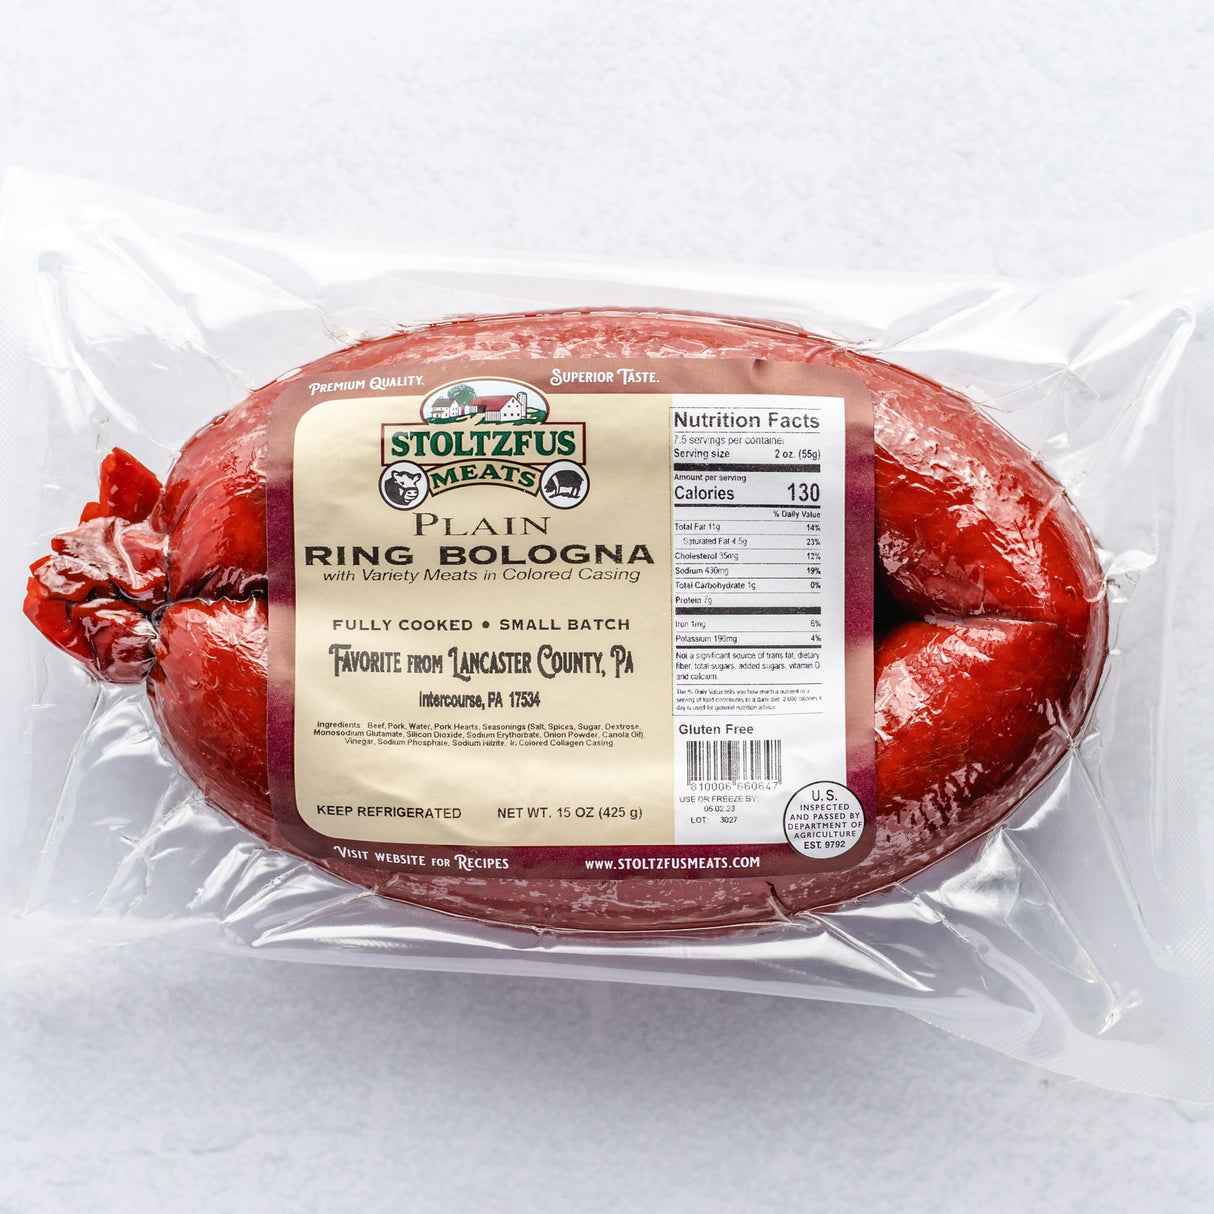 Ring Bologna - Stoltzfus Meats